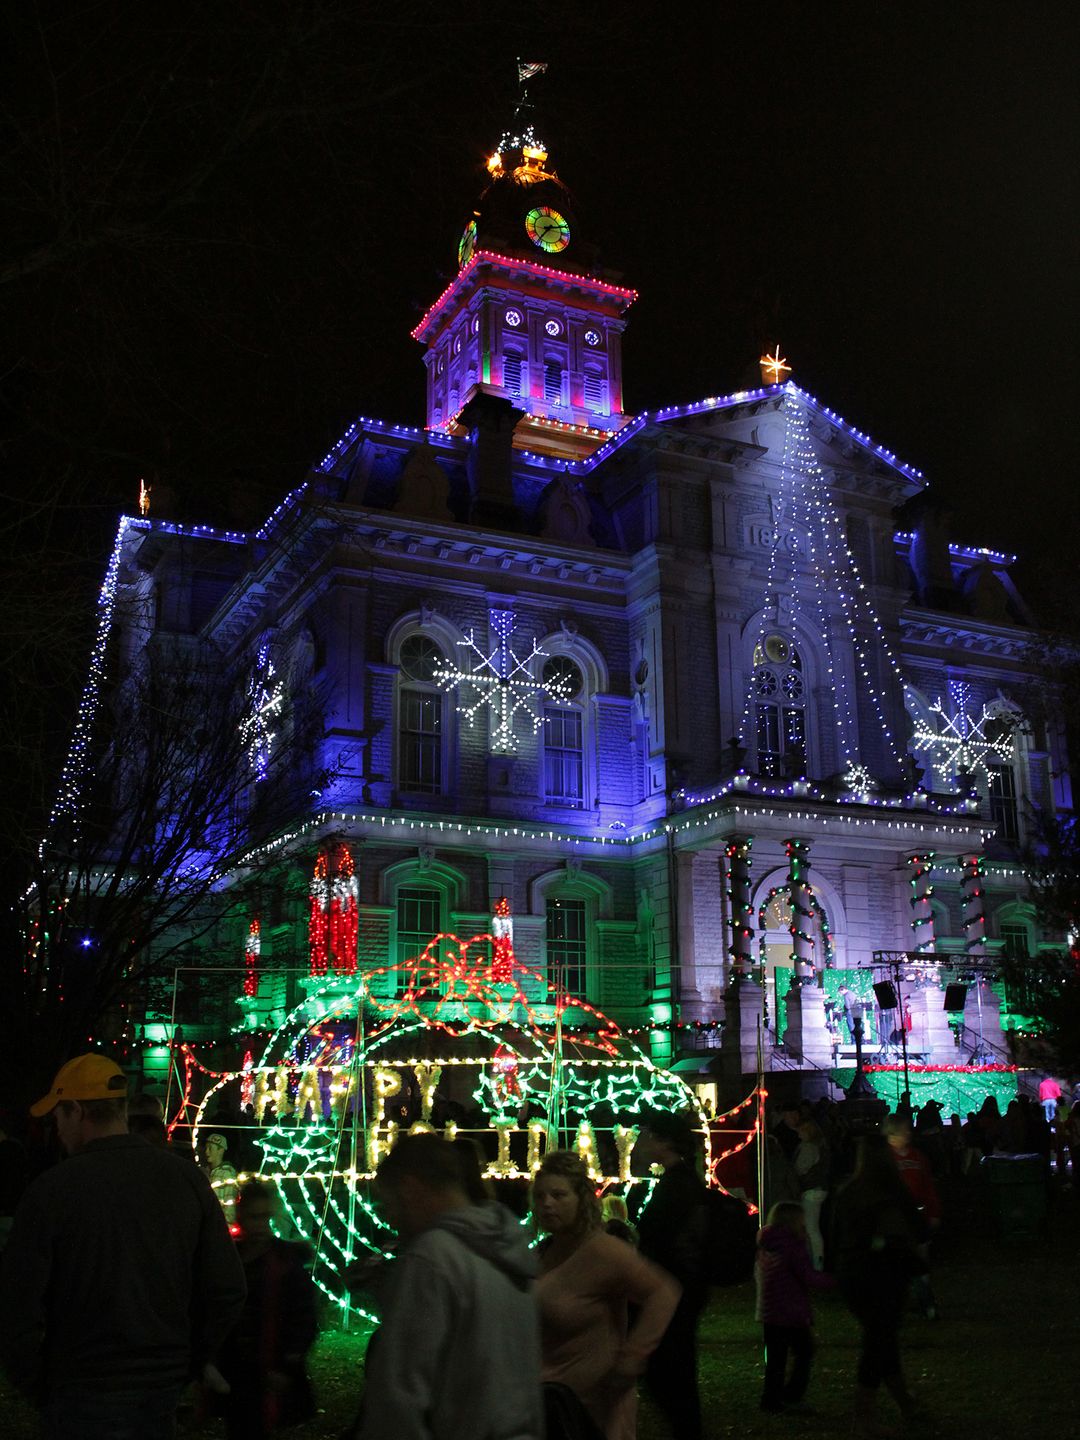 67th Annual Lighting of the Courthouse